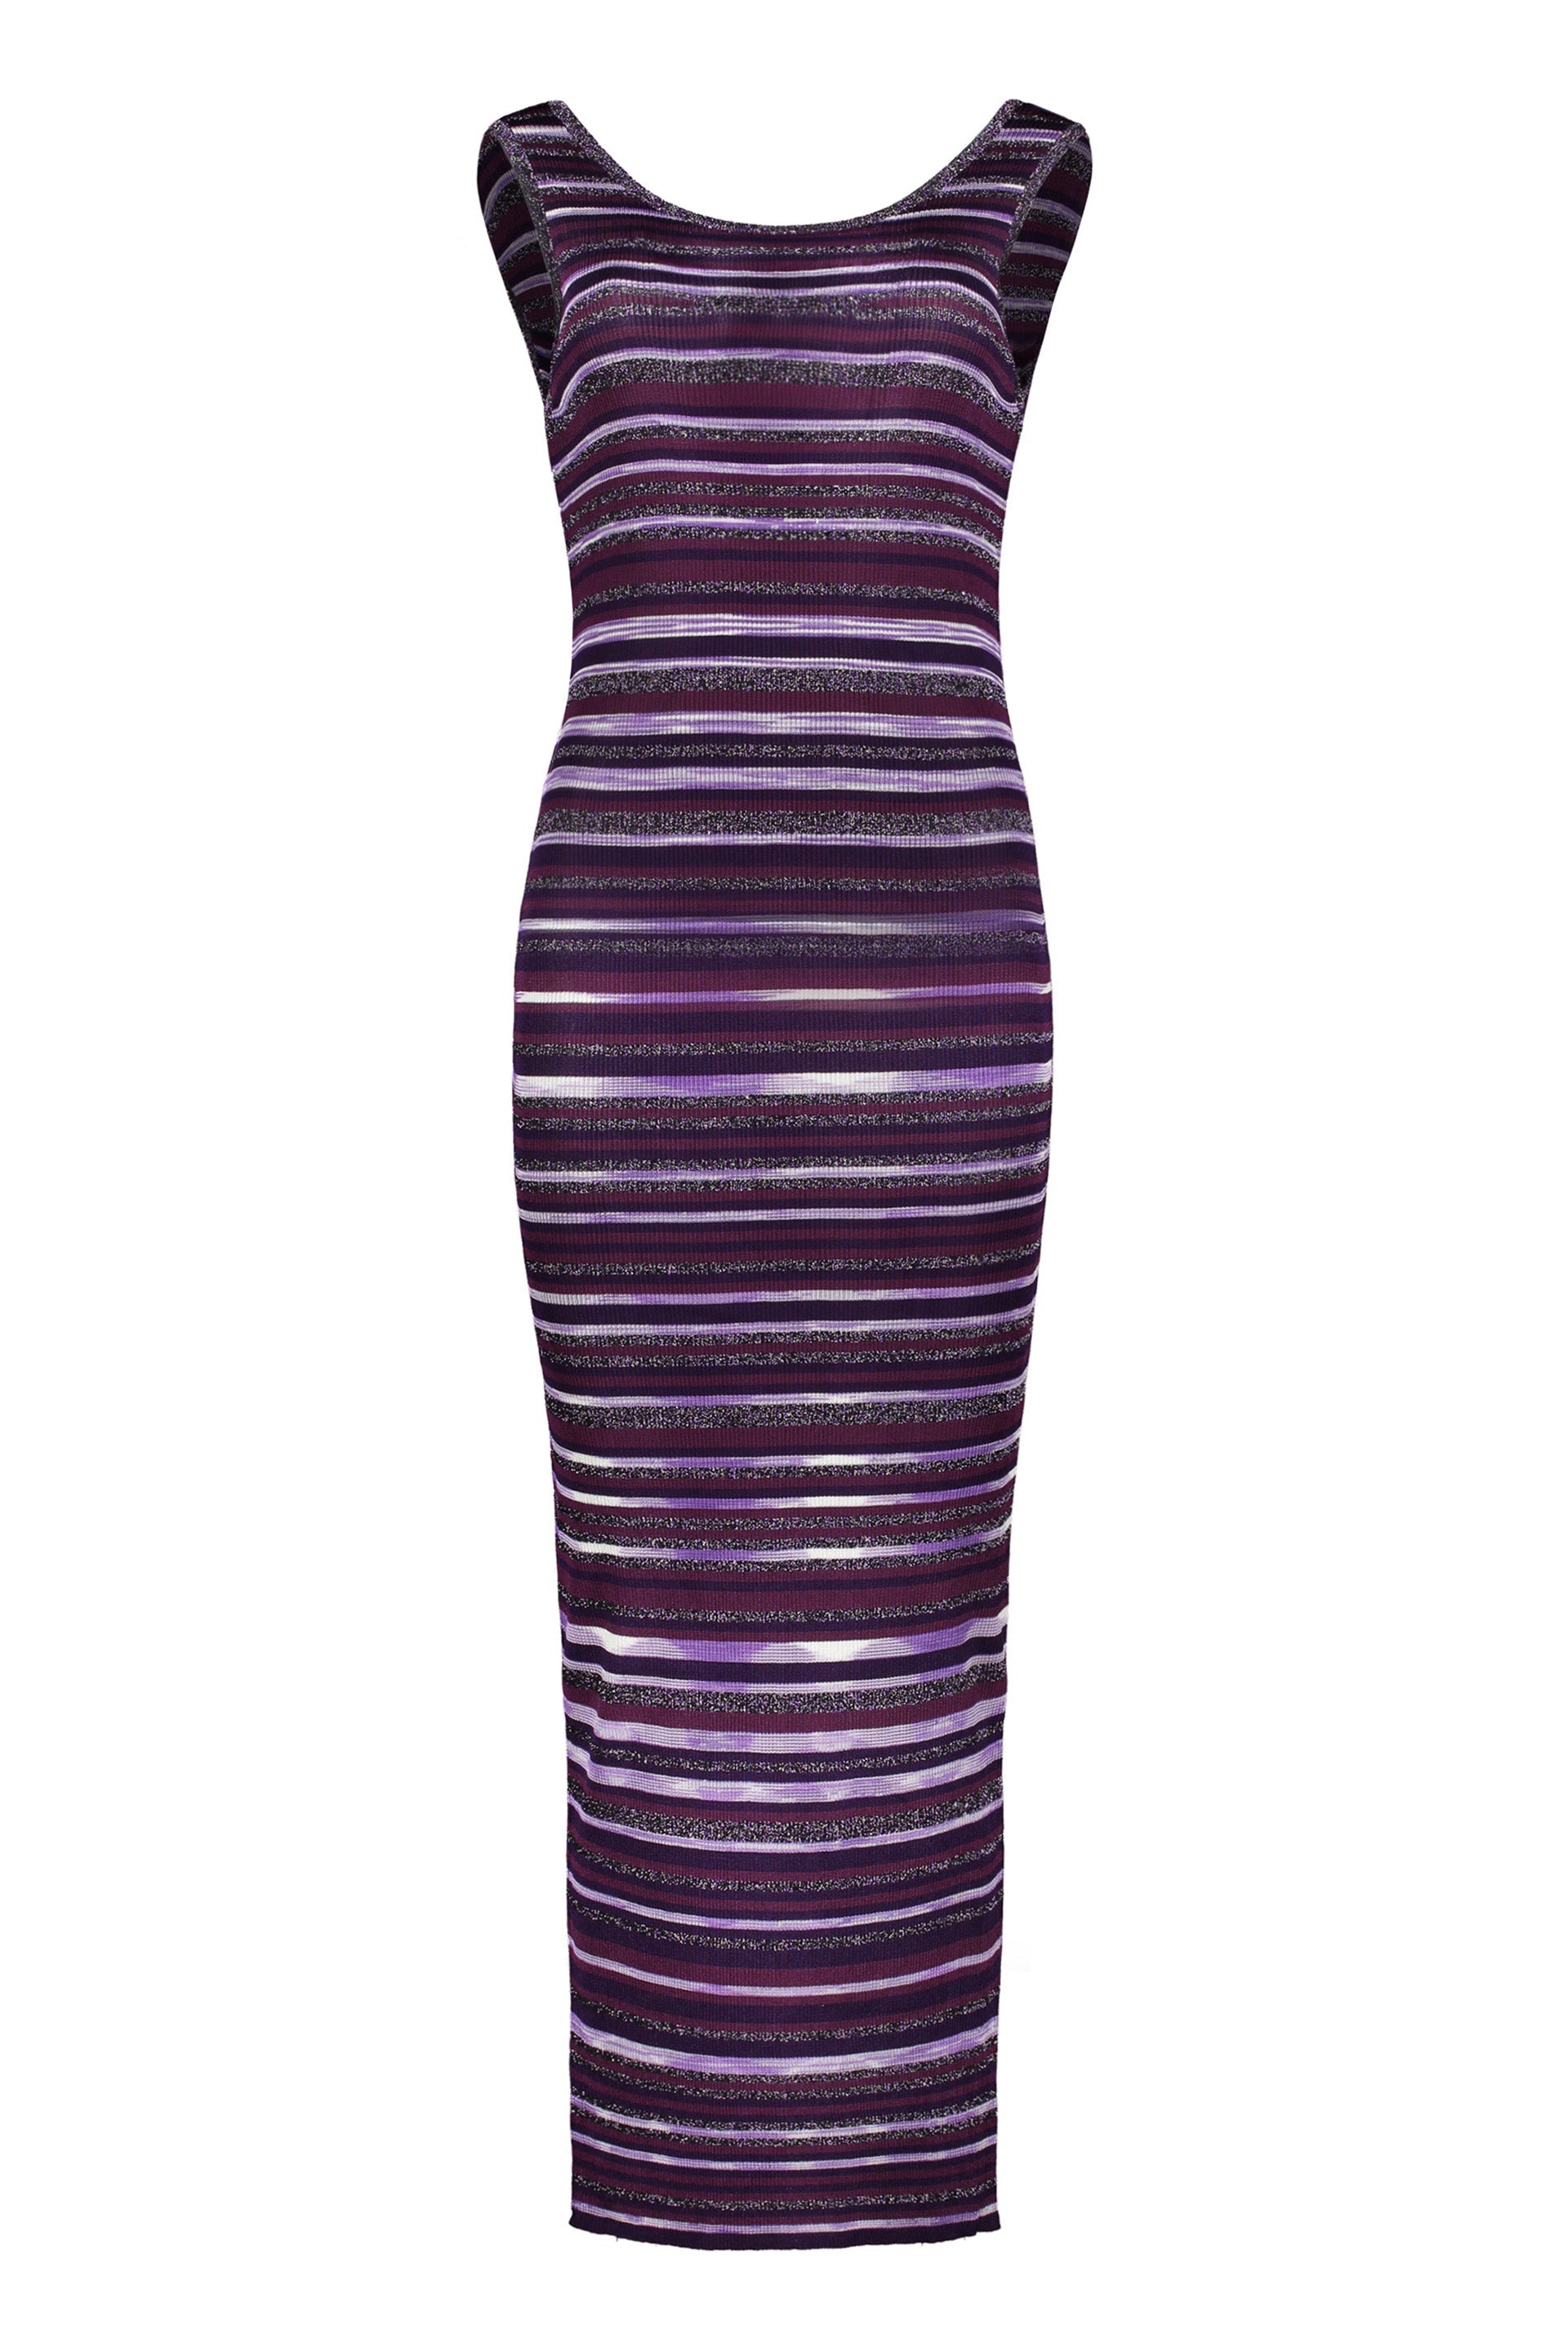 Missoni-OUTLET-SALE-Knitted-dress-Kleider-Rocke-L-ARCHIVE-COLLECTION_1db2527d-b6f7-49fe-97be-f67364724d60.jpg